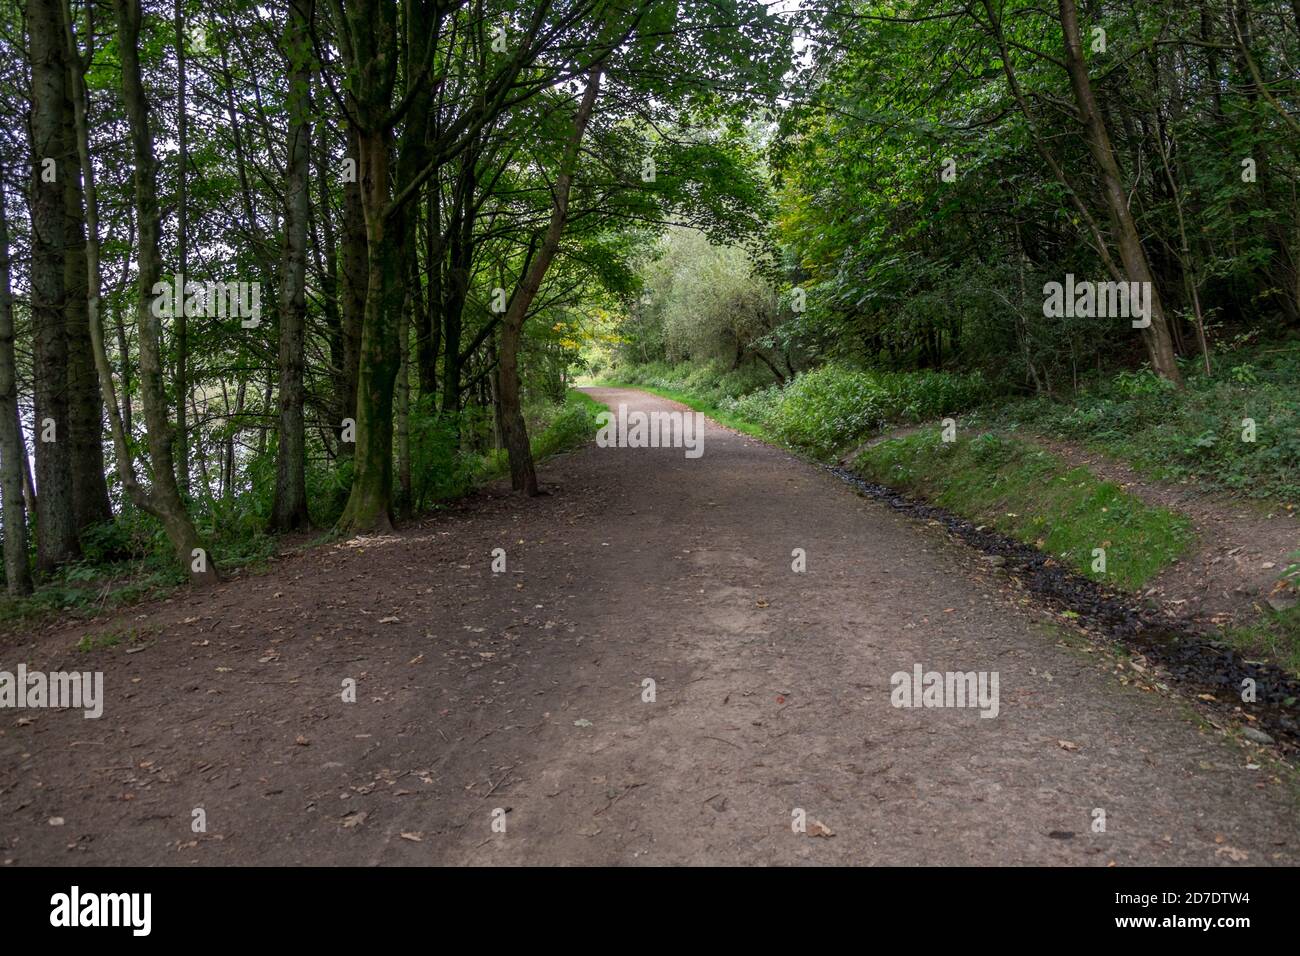 Woodland trees along a gravel footpath in a nature park. Stock Photo